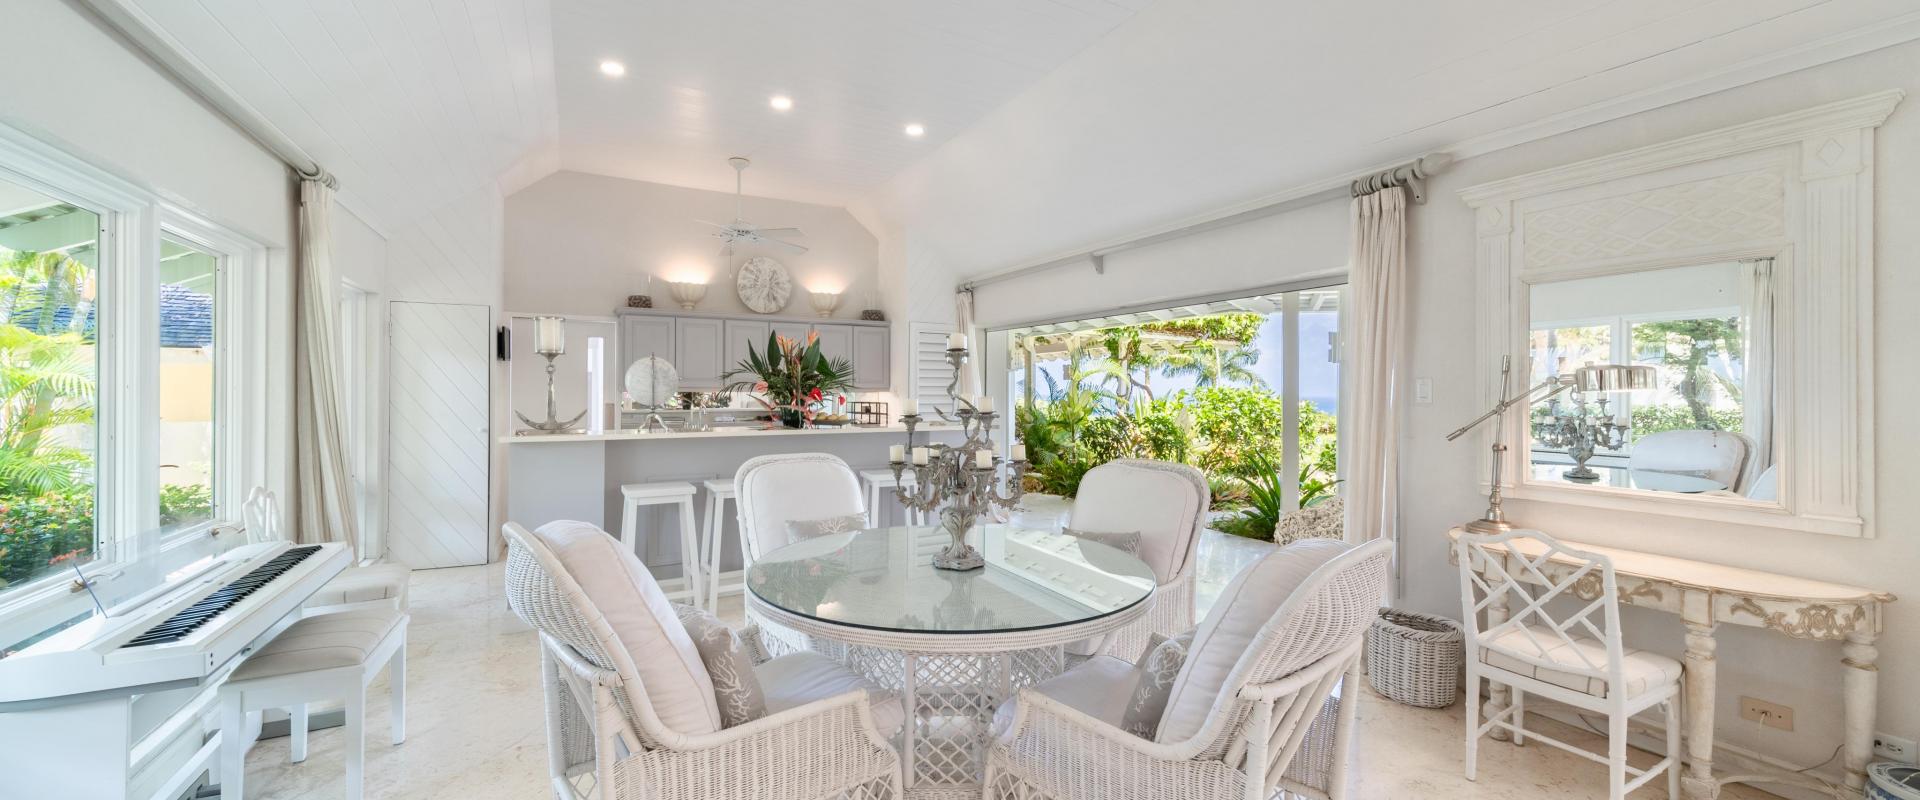 Point of View Holiday Rental In Sandy Lane Barbados Luxury Indoor Living Room with TV and Seating